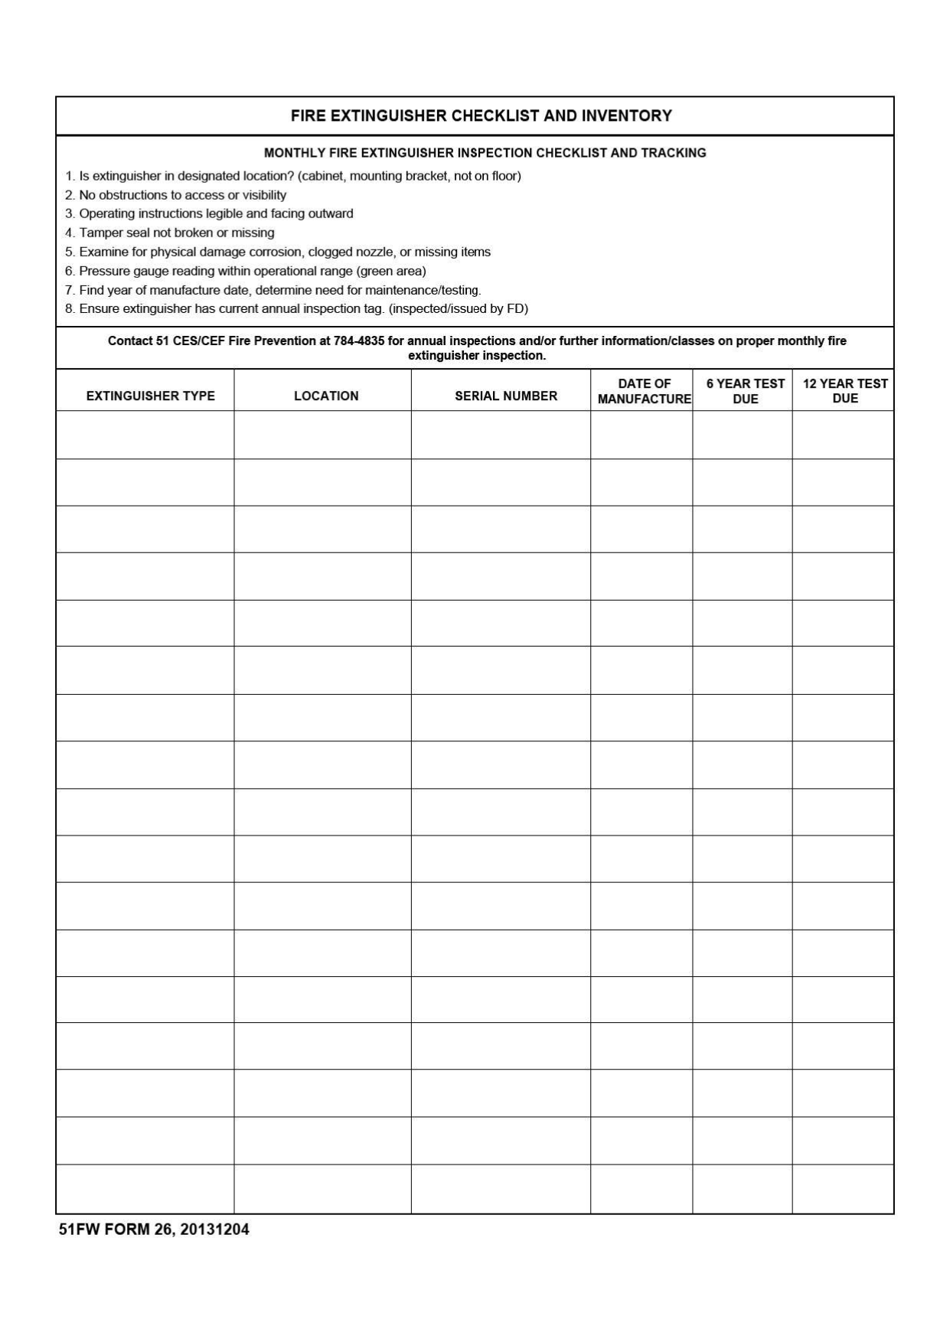 51 FW Form 26 Fire Extinguisher Checklist and Inventory, Page 1